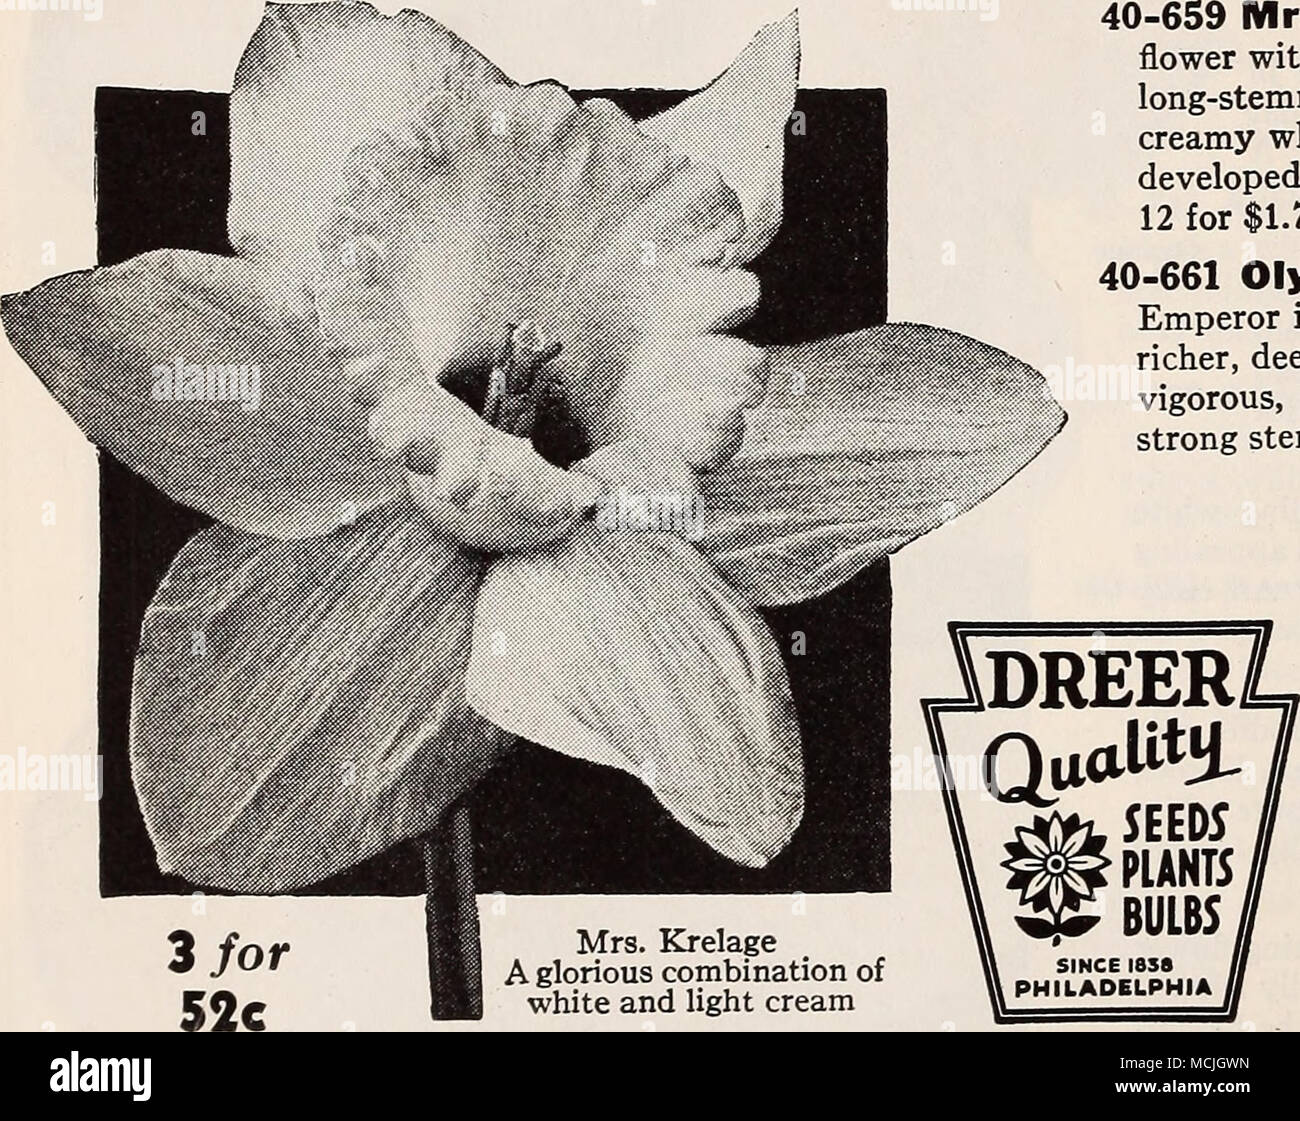 . Make your spring garden more beautiful than it has ever been by planting Dreer's Super Giant Daffodils in quantity. They are easy to grow and will give a marvelous display early in the spring. Plant in well-prepared soil at a depth not less than 4 times the height of the bulb. They are perfectly hardy and will last for many years. 40-650 G. H. Van Waveren. A bold well-proportioned flower carried artistically on a strong stem. It is an early bloomer of an intense brilliant yellow color enhanced with gleaming gold shimmering in the texture. It will give entire satisfaction. Round Btdbs: 3 for  Stock Photo